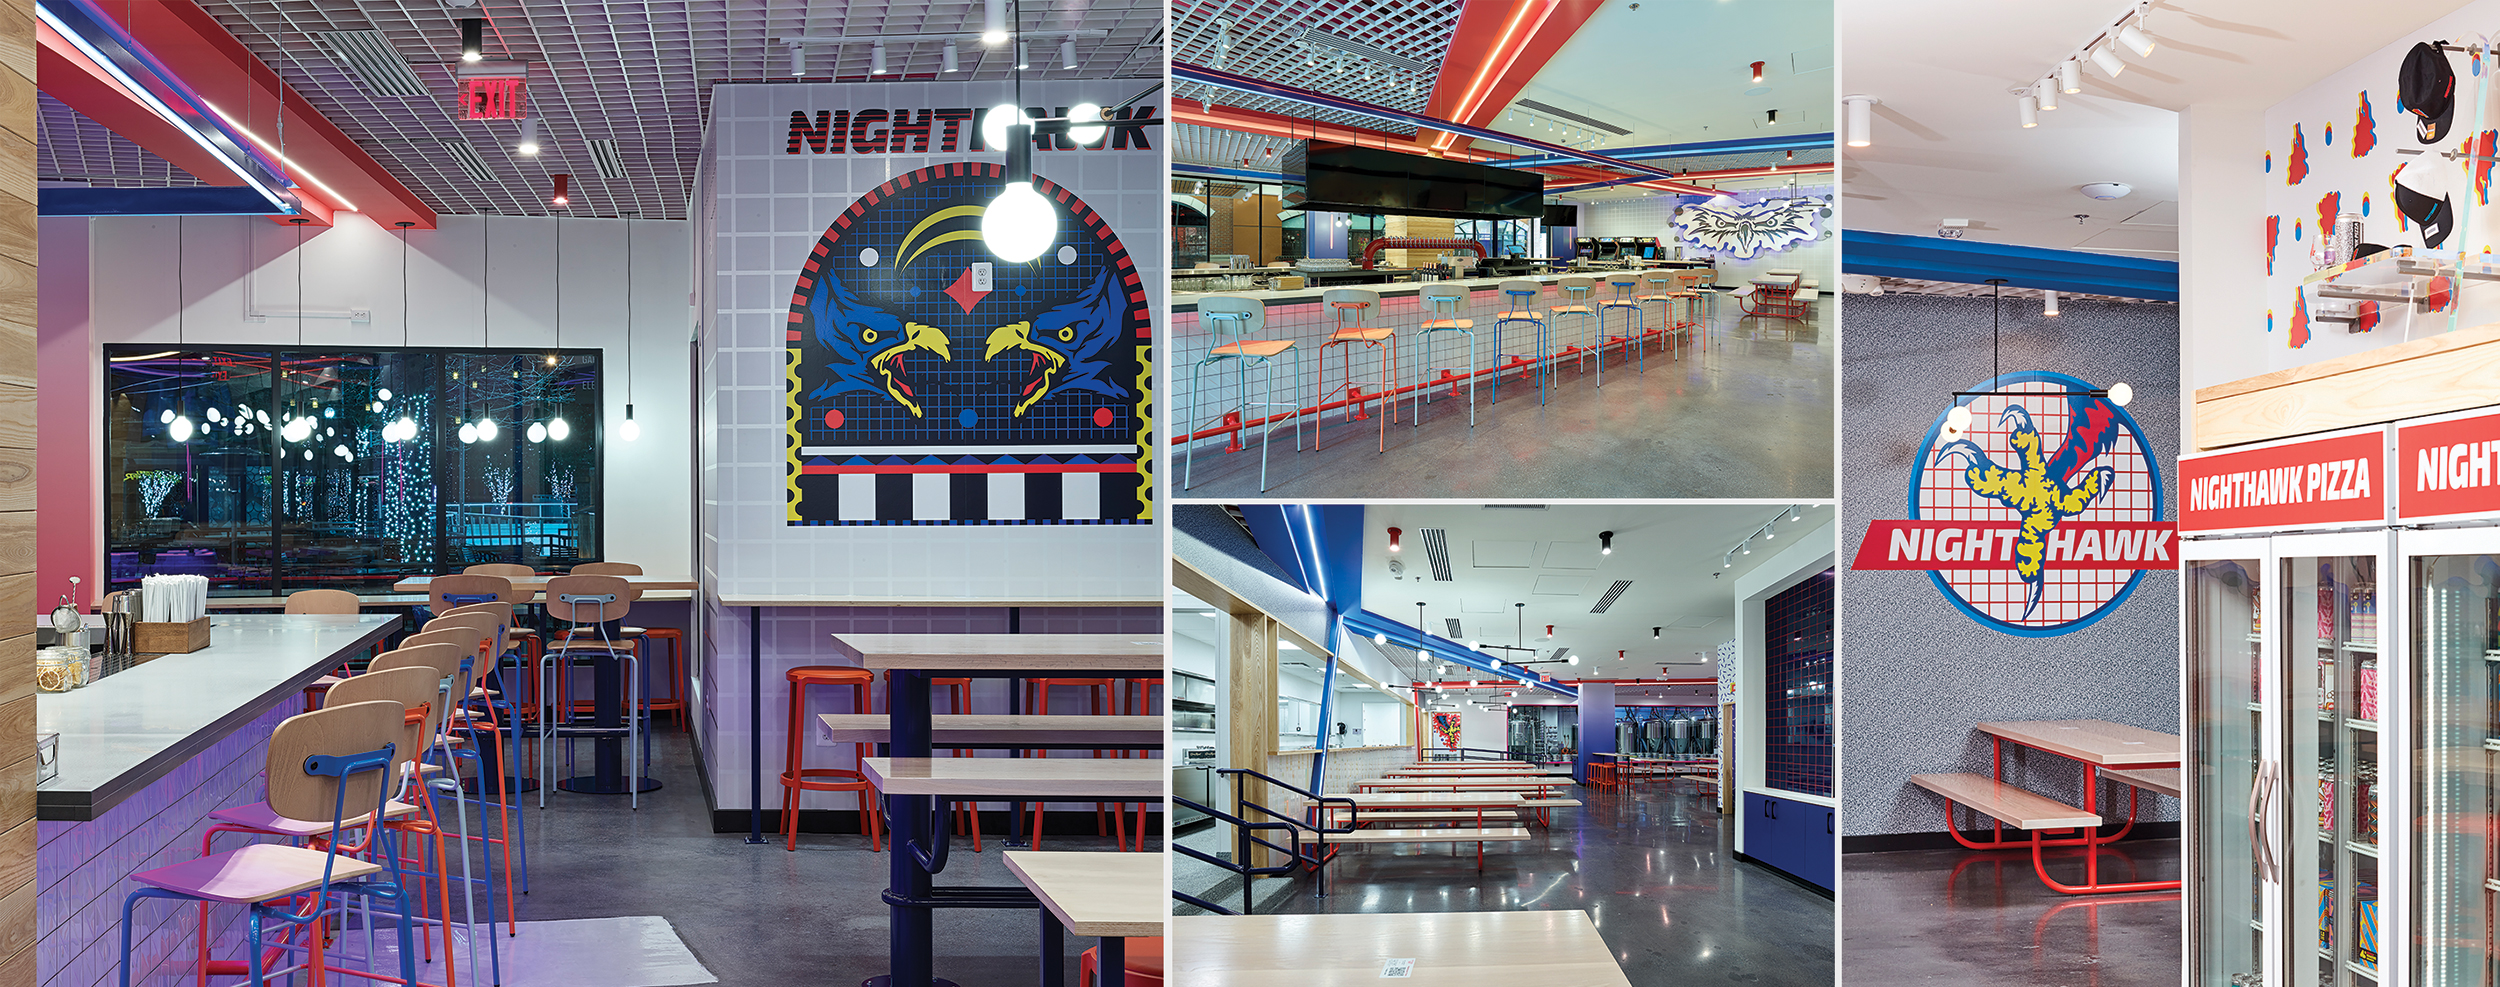 This page: Much like The Max restaurant in “Saved by the Bell,” Nighthawk Brewery & Pizza features neon, eclectic patterns and bold graphics in its latest Arlington, Va., locale.